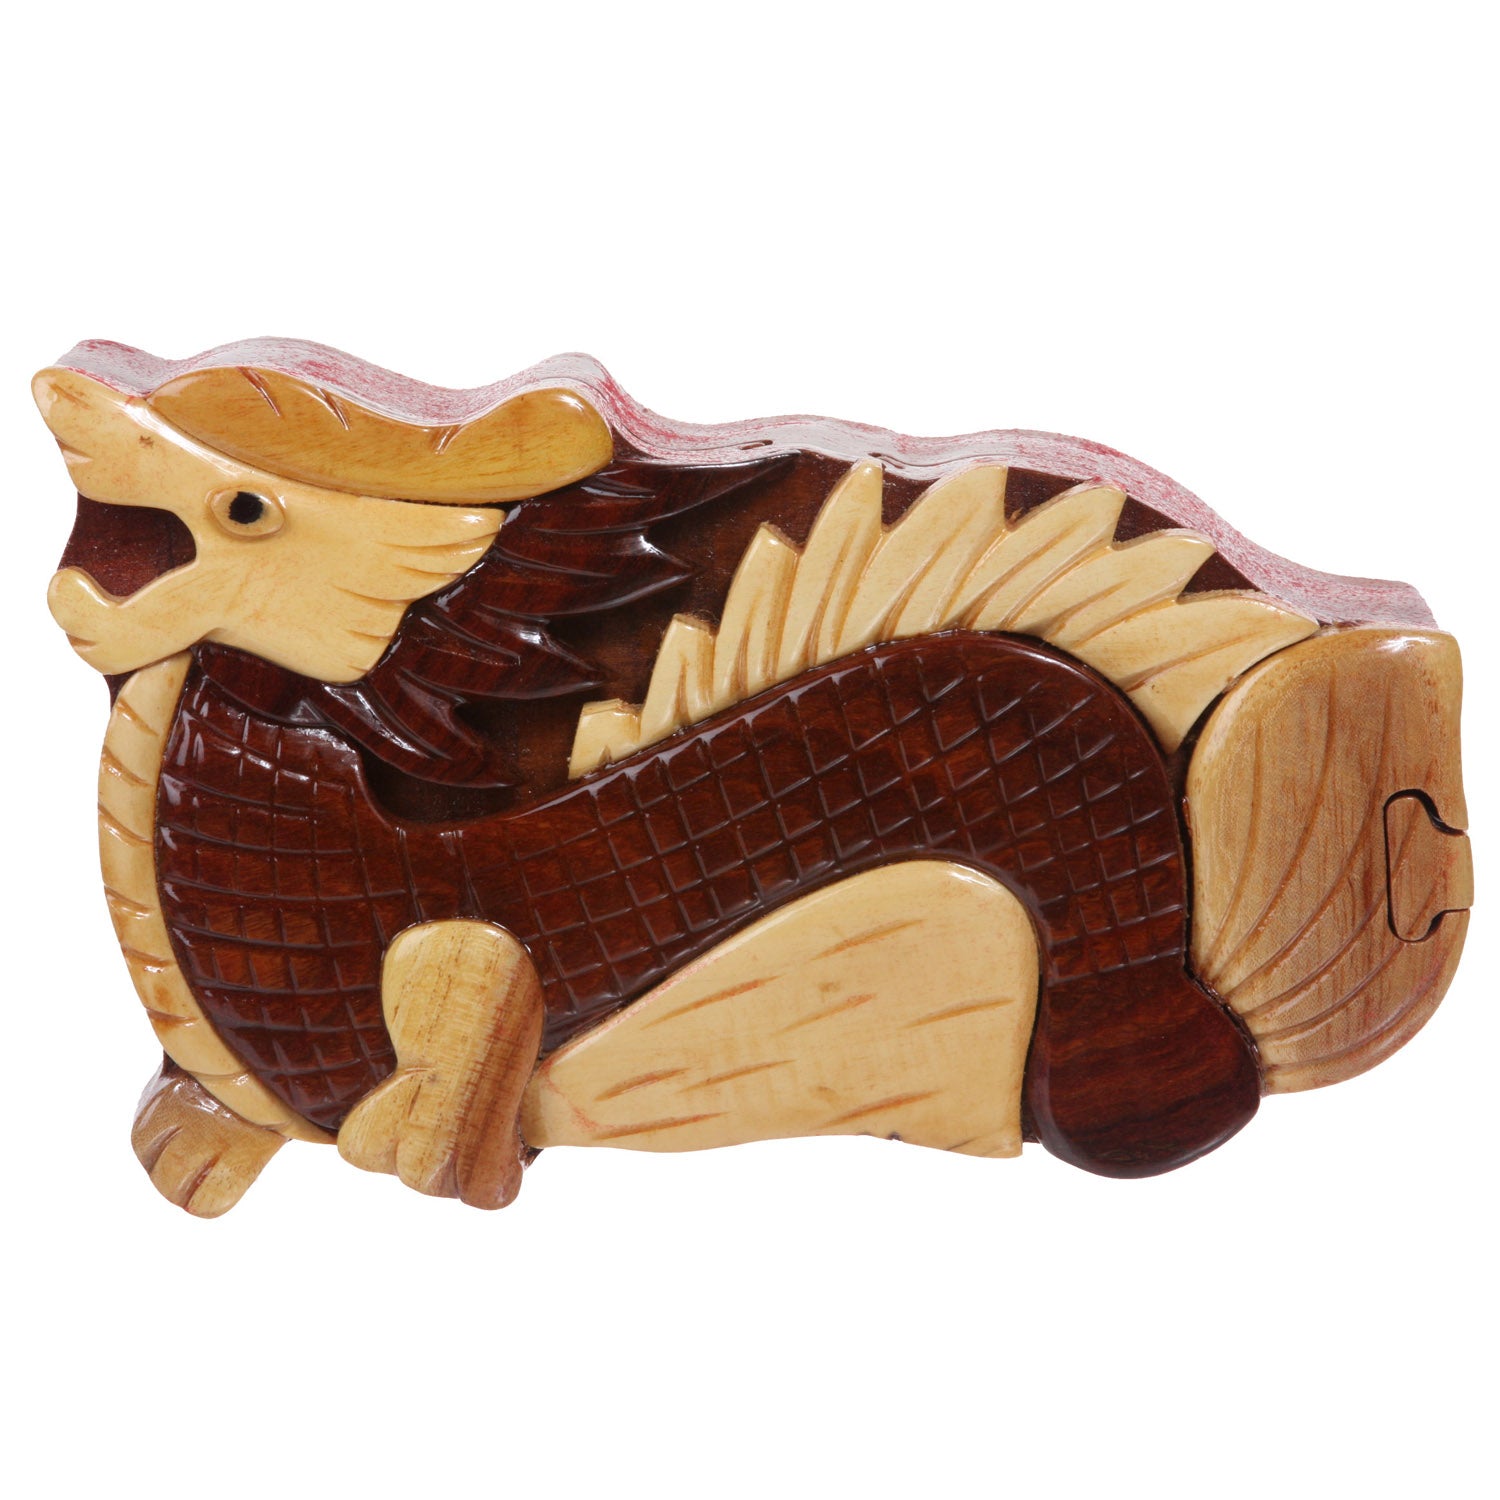 Handcrafted Wooden Animal Shape Secret Jewelry Puzzle Box - Dragon